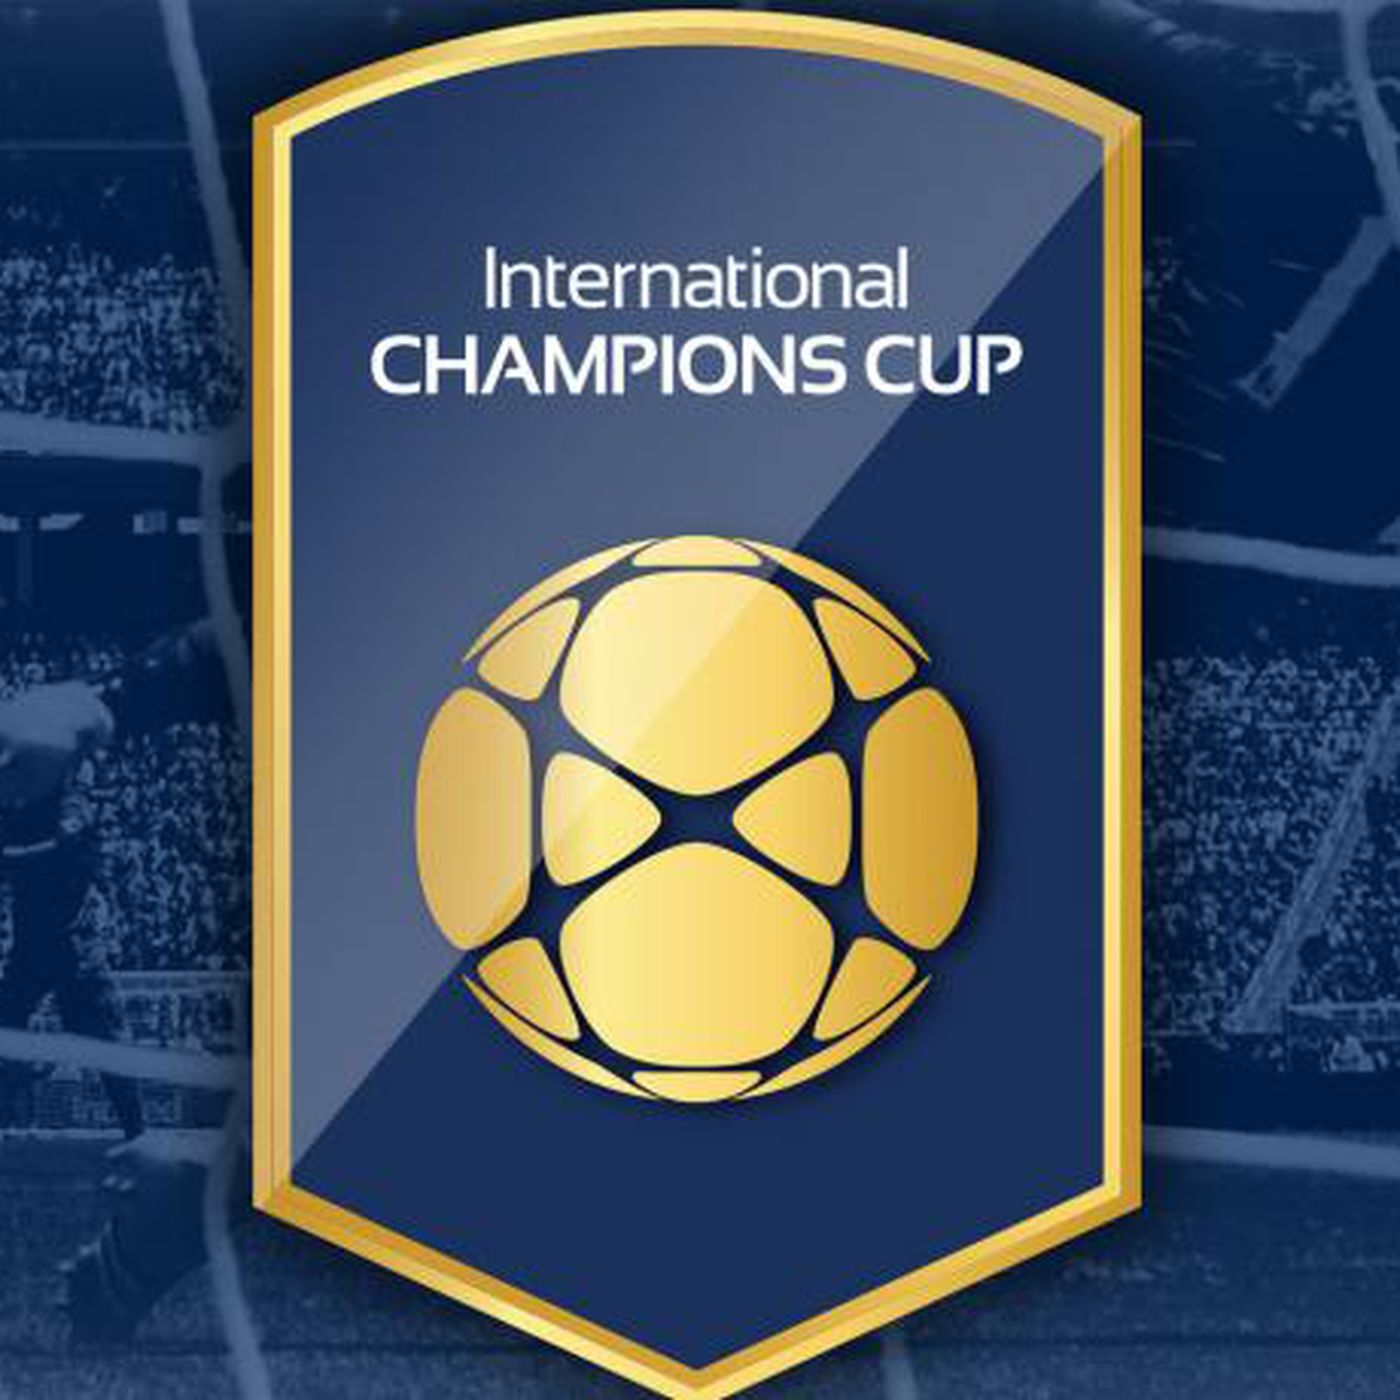 International Champions Cup 2022 Schedule International Champions Cup Cancels All Asia Matches This Summer Due To  Covid-19 Outbreak. - Cartilage Free Captain